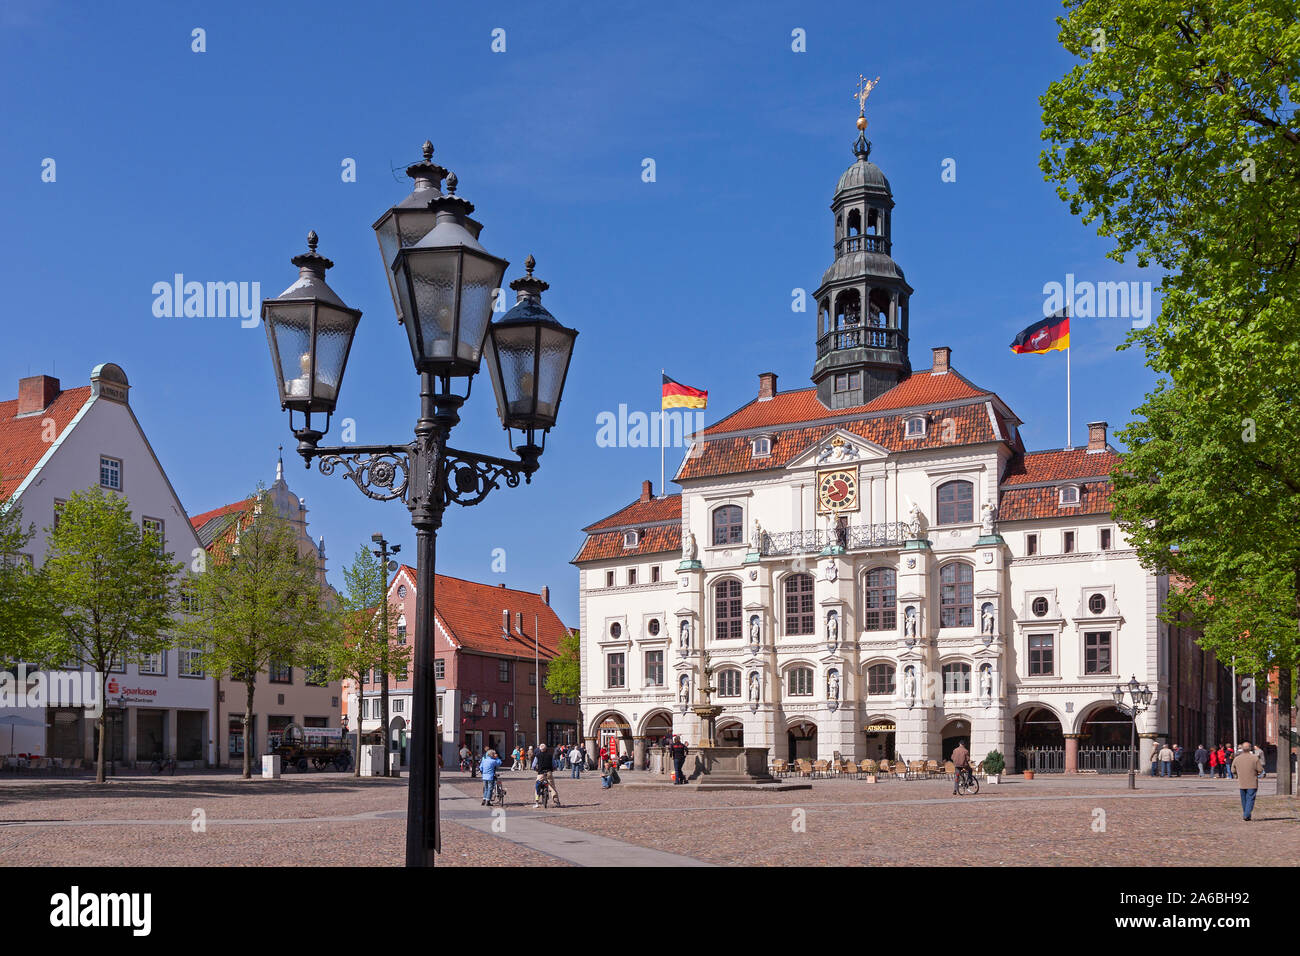 The town hall of Lüneburg in Lower Saxony, Germany. Stock Photo